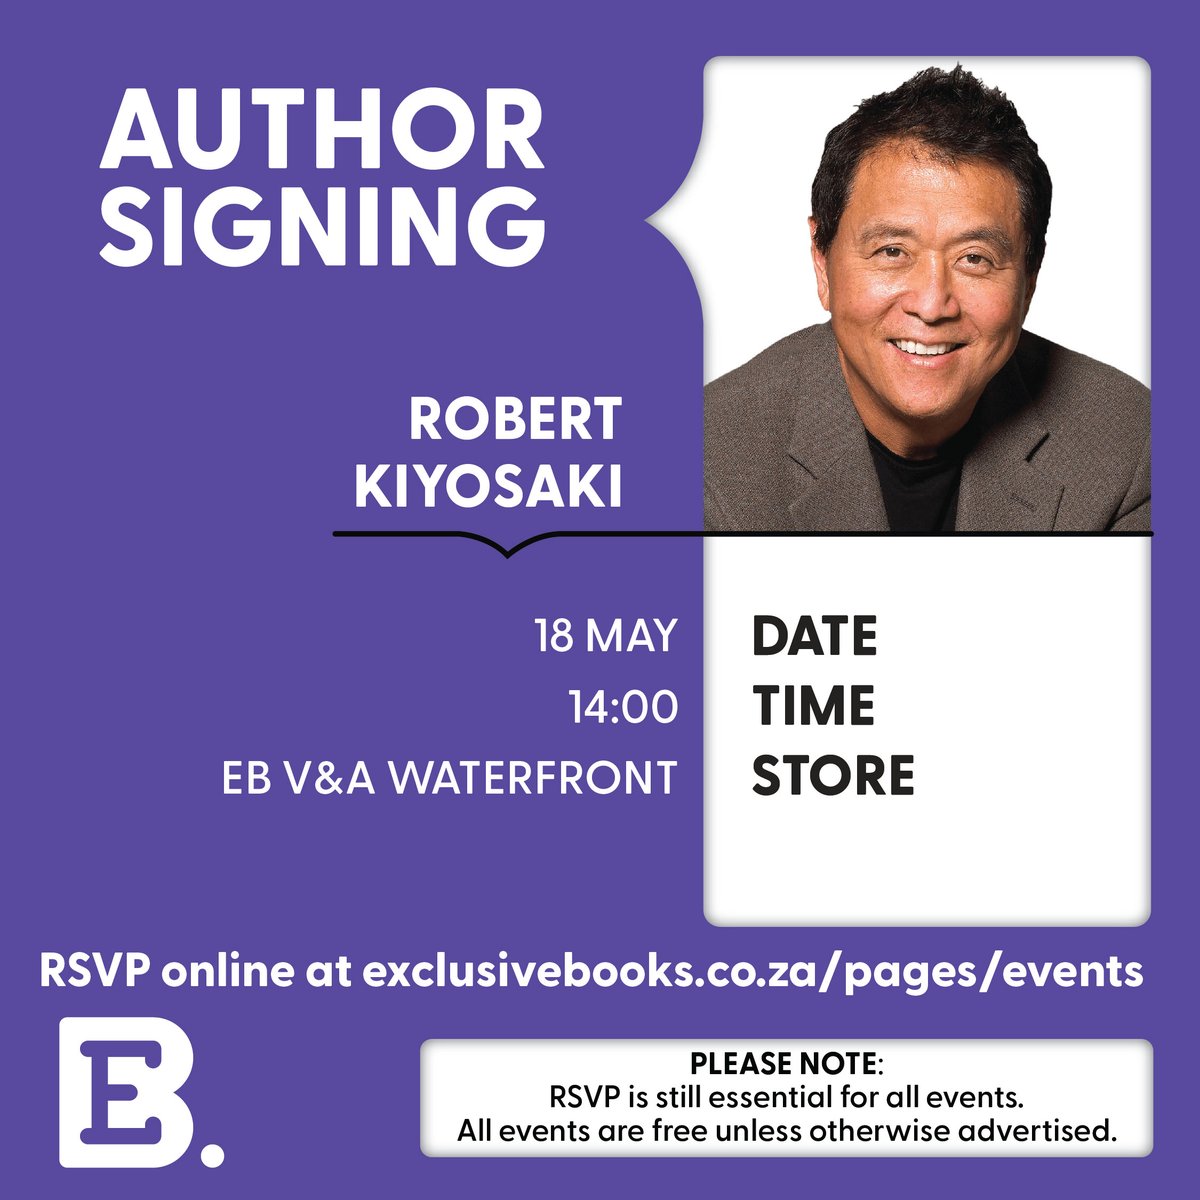 📍🗓️ Join us at EB @VandAWaterfront for a book signing with Robert Kiyosaki!

@theRealKiyosaki

📩 RSVP ONLINE: exclusivebooks.co.za/pages/events?e…